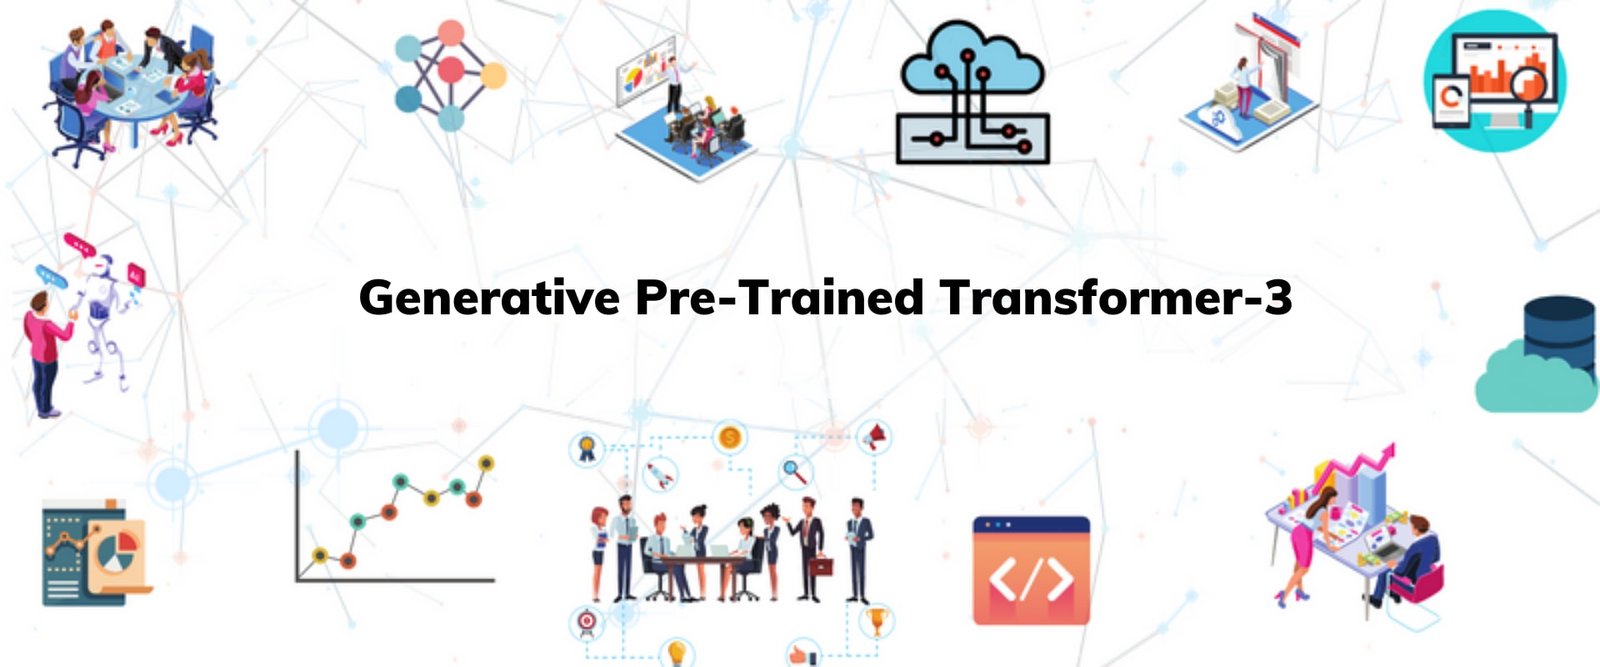 Generative Pre Trained Transformer Pianalytix Build Real World Tech Projects